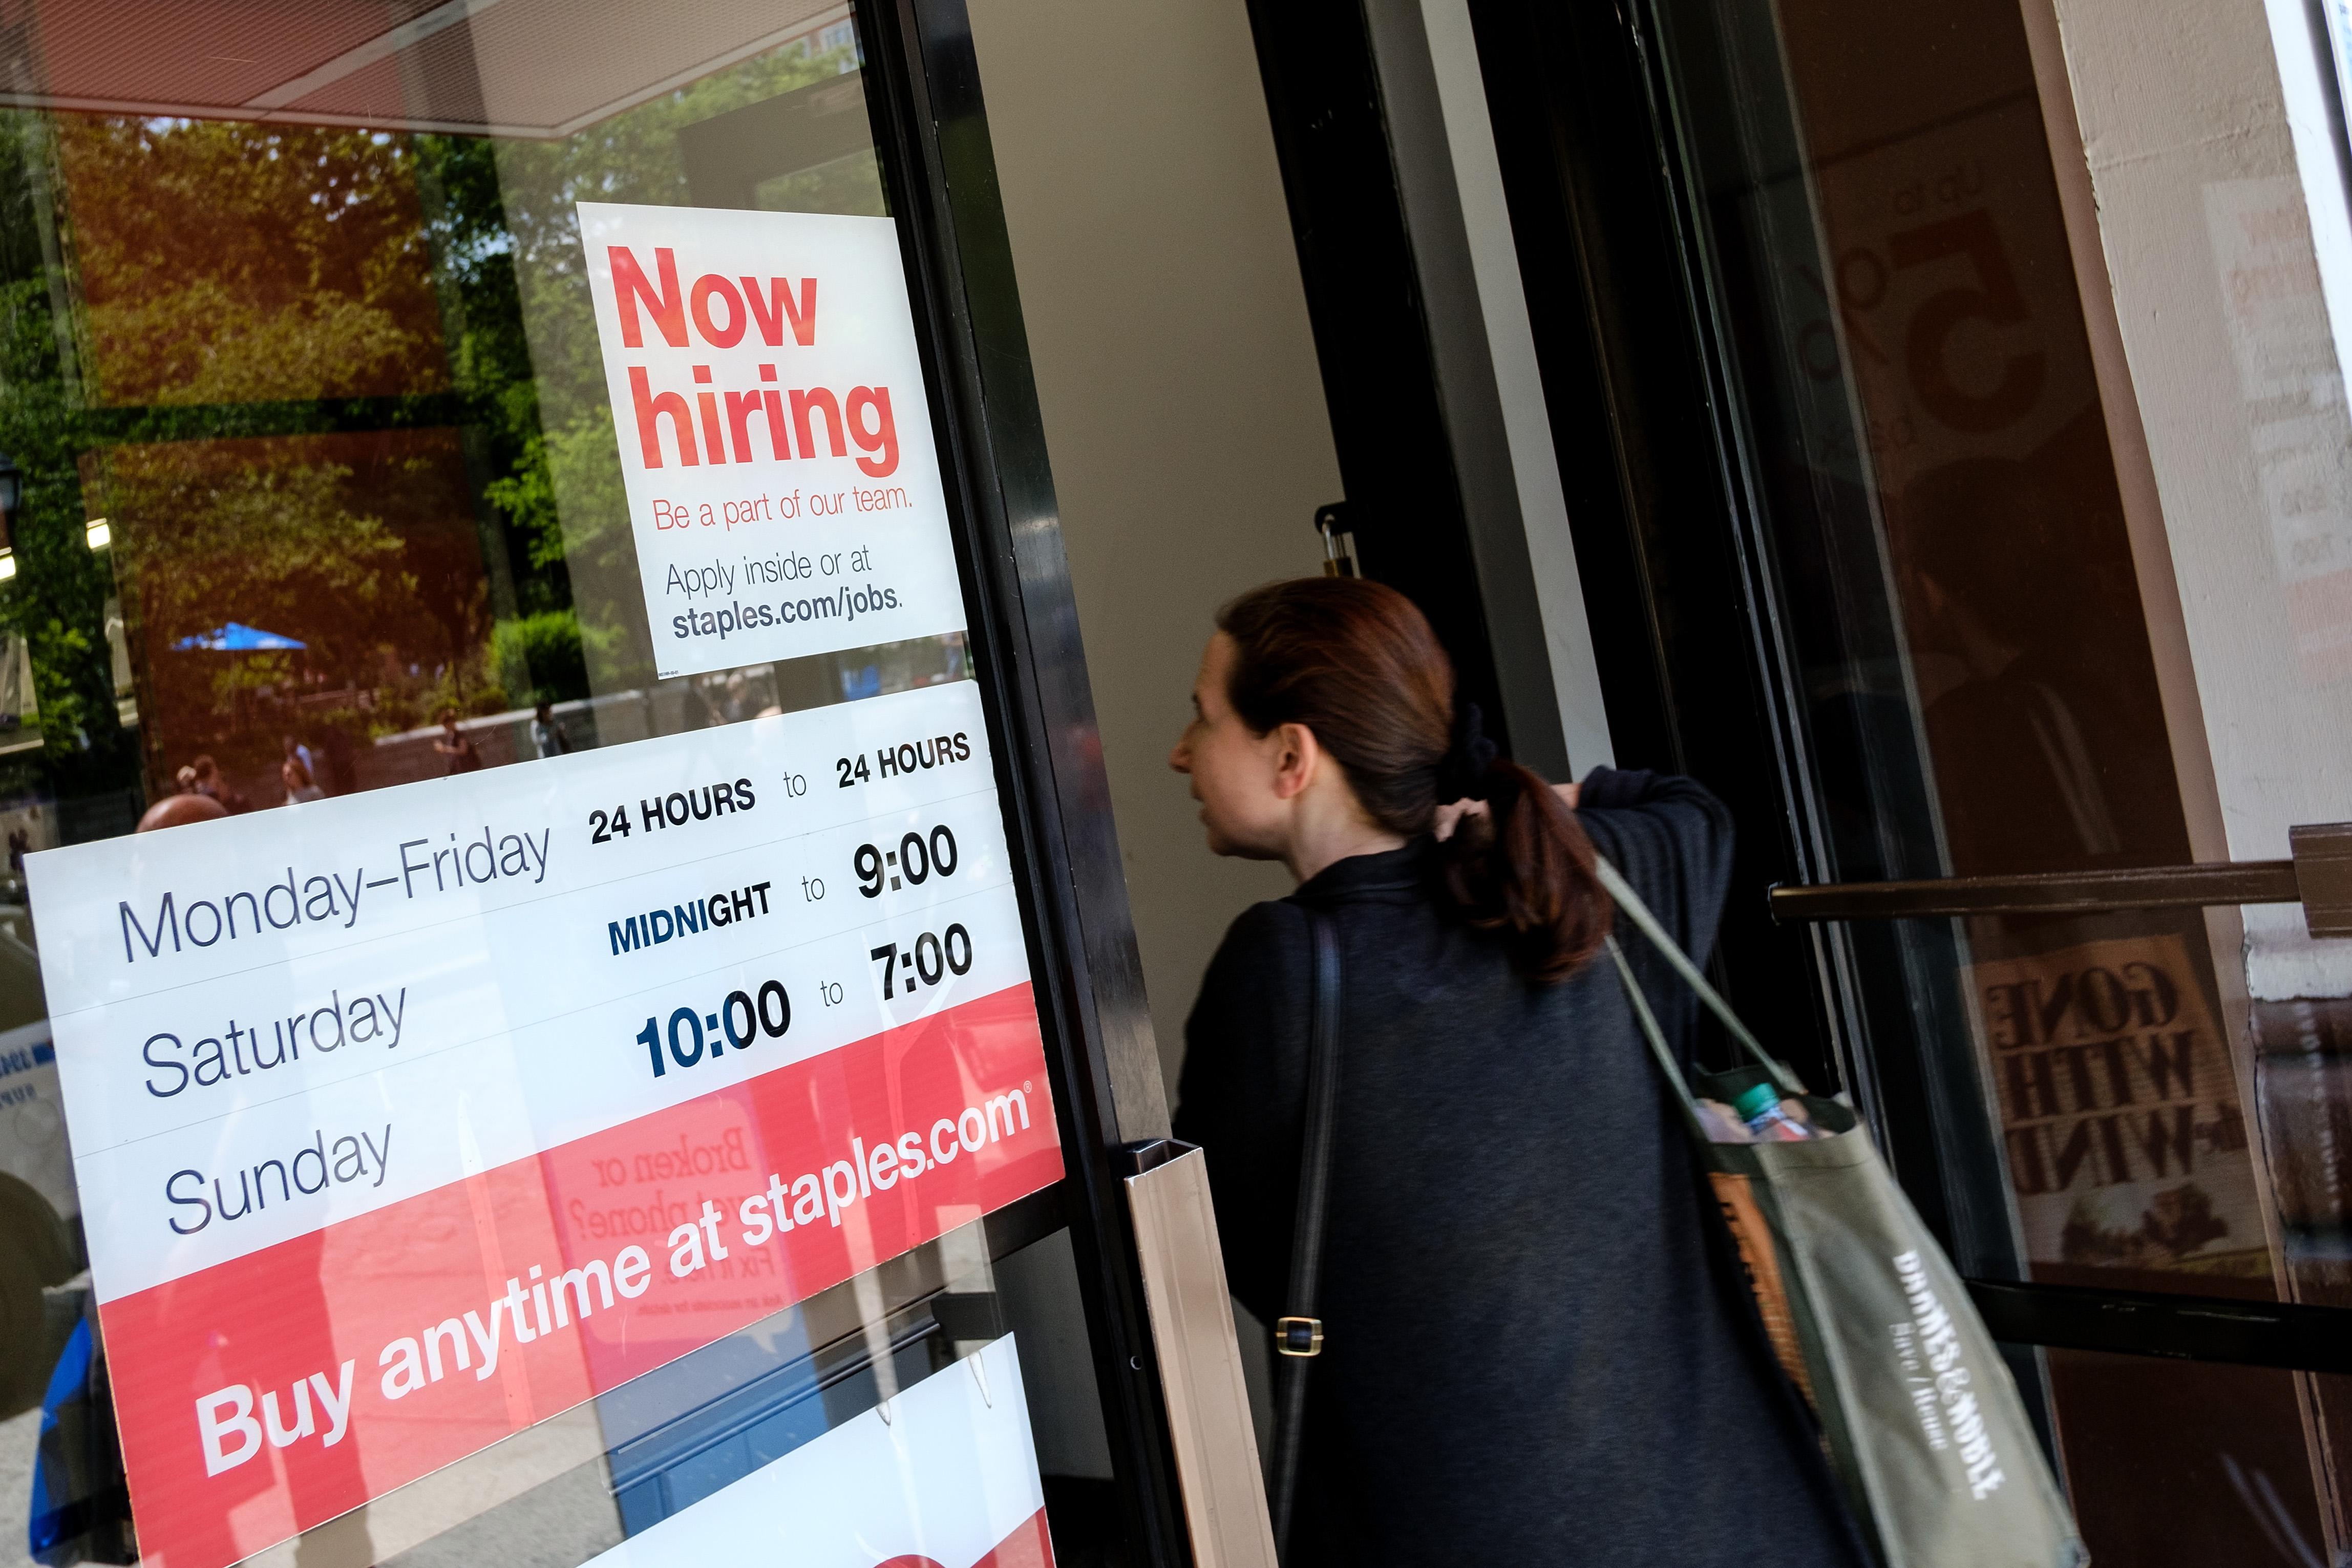 NEW YORK, NY - JUNE 2: A 'now hiring' sign is displayed on the front entrance to a Staples store,  June 2, 2017 in New York City. While U.S. unemployment has hit it lowest level since 2001 at 4.3 percent for May, the U.S. economy added only 138,000 jobs last month and many Americans have stopped looking for work. (Photo by Drew Angerer/Getty Images)